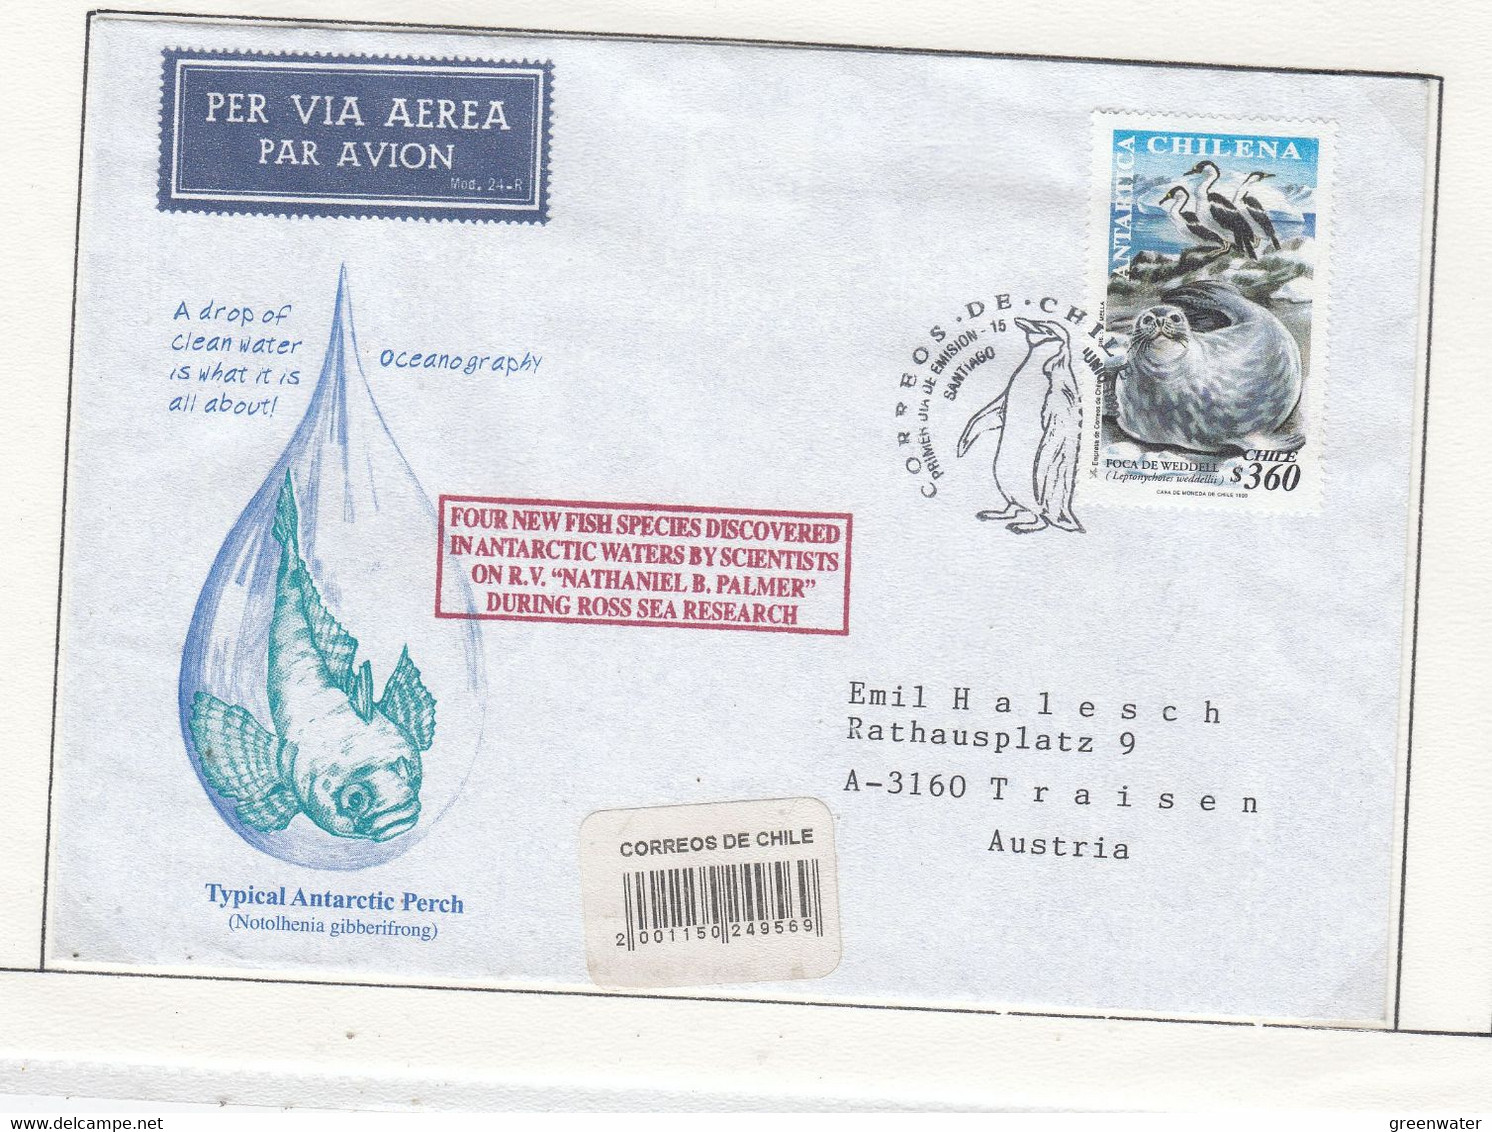 CHILE 1998 Cover "4 New Fish Discovered In The Antarctic Waters" Ca 1998 (CH163A) - Programas De Investigación